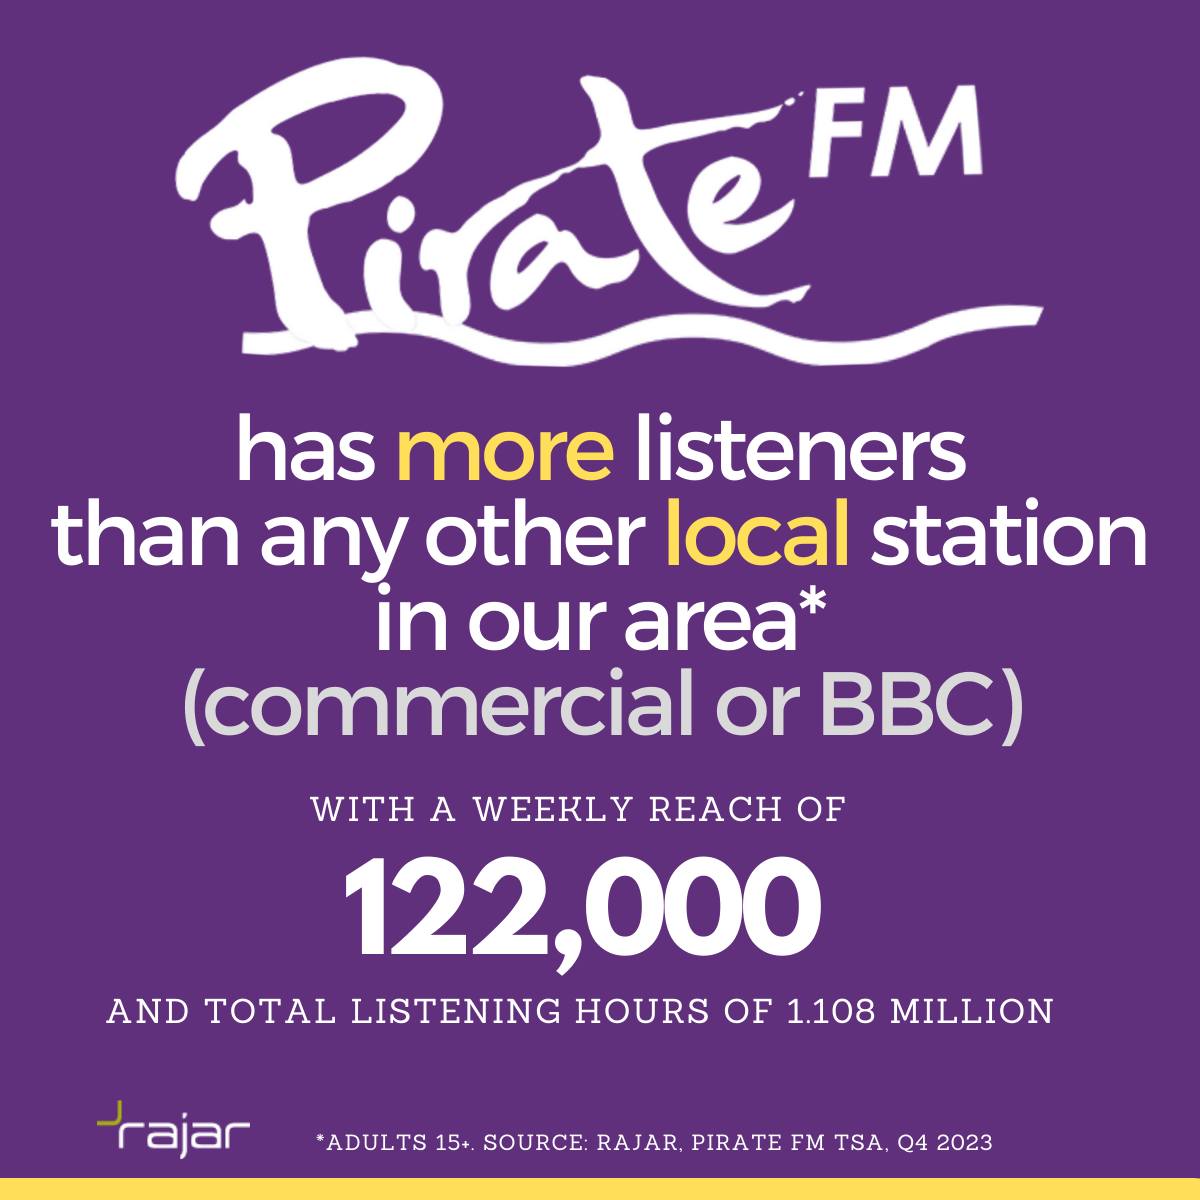 Proud to be a part of two amazing radio brands as we celebrate record audience figures today! 📷 #Wave105 #PirateFM